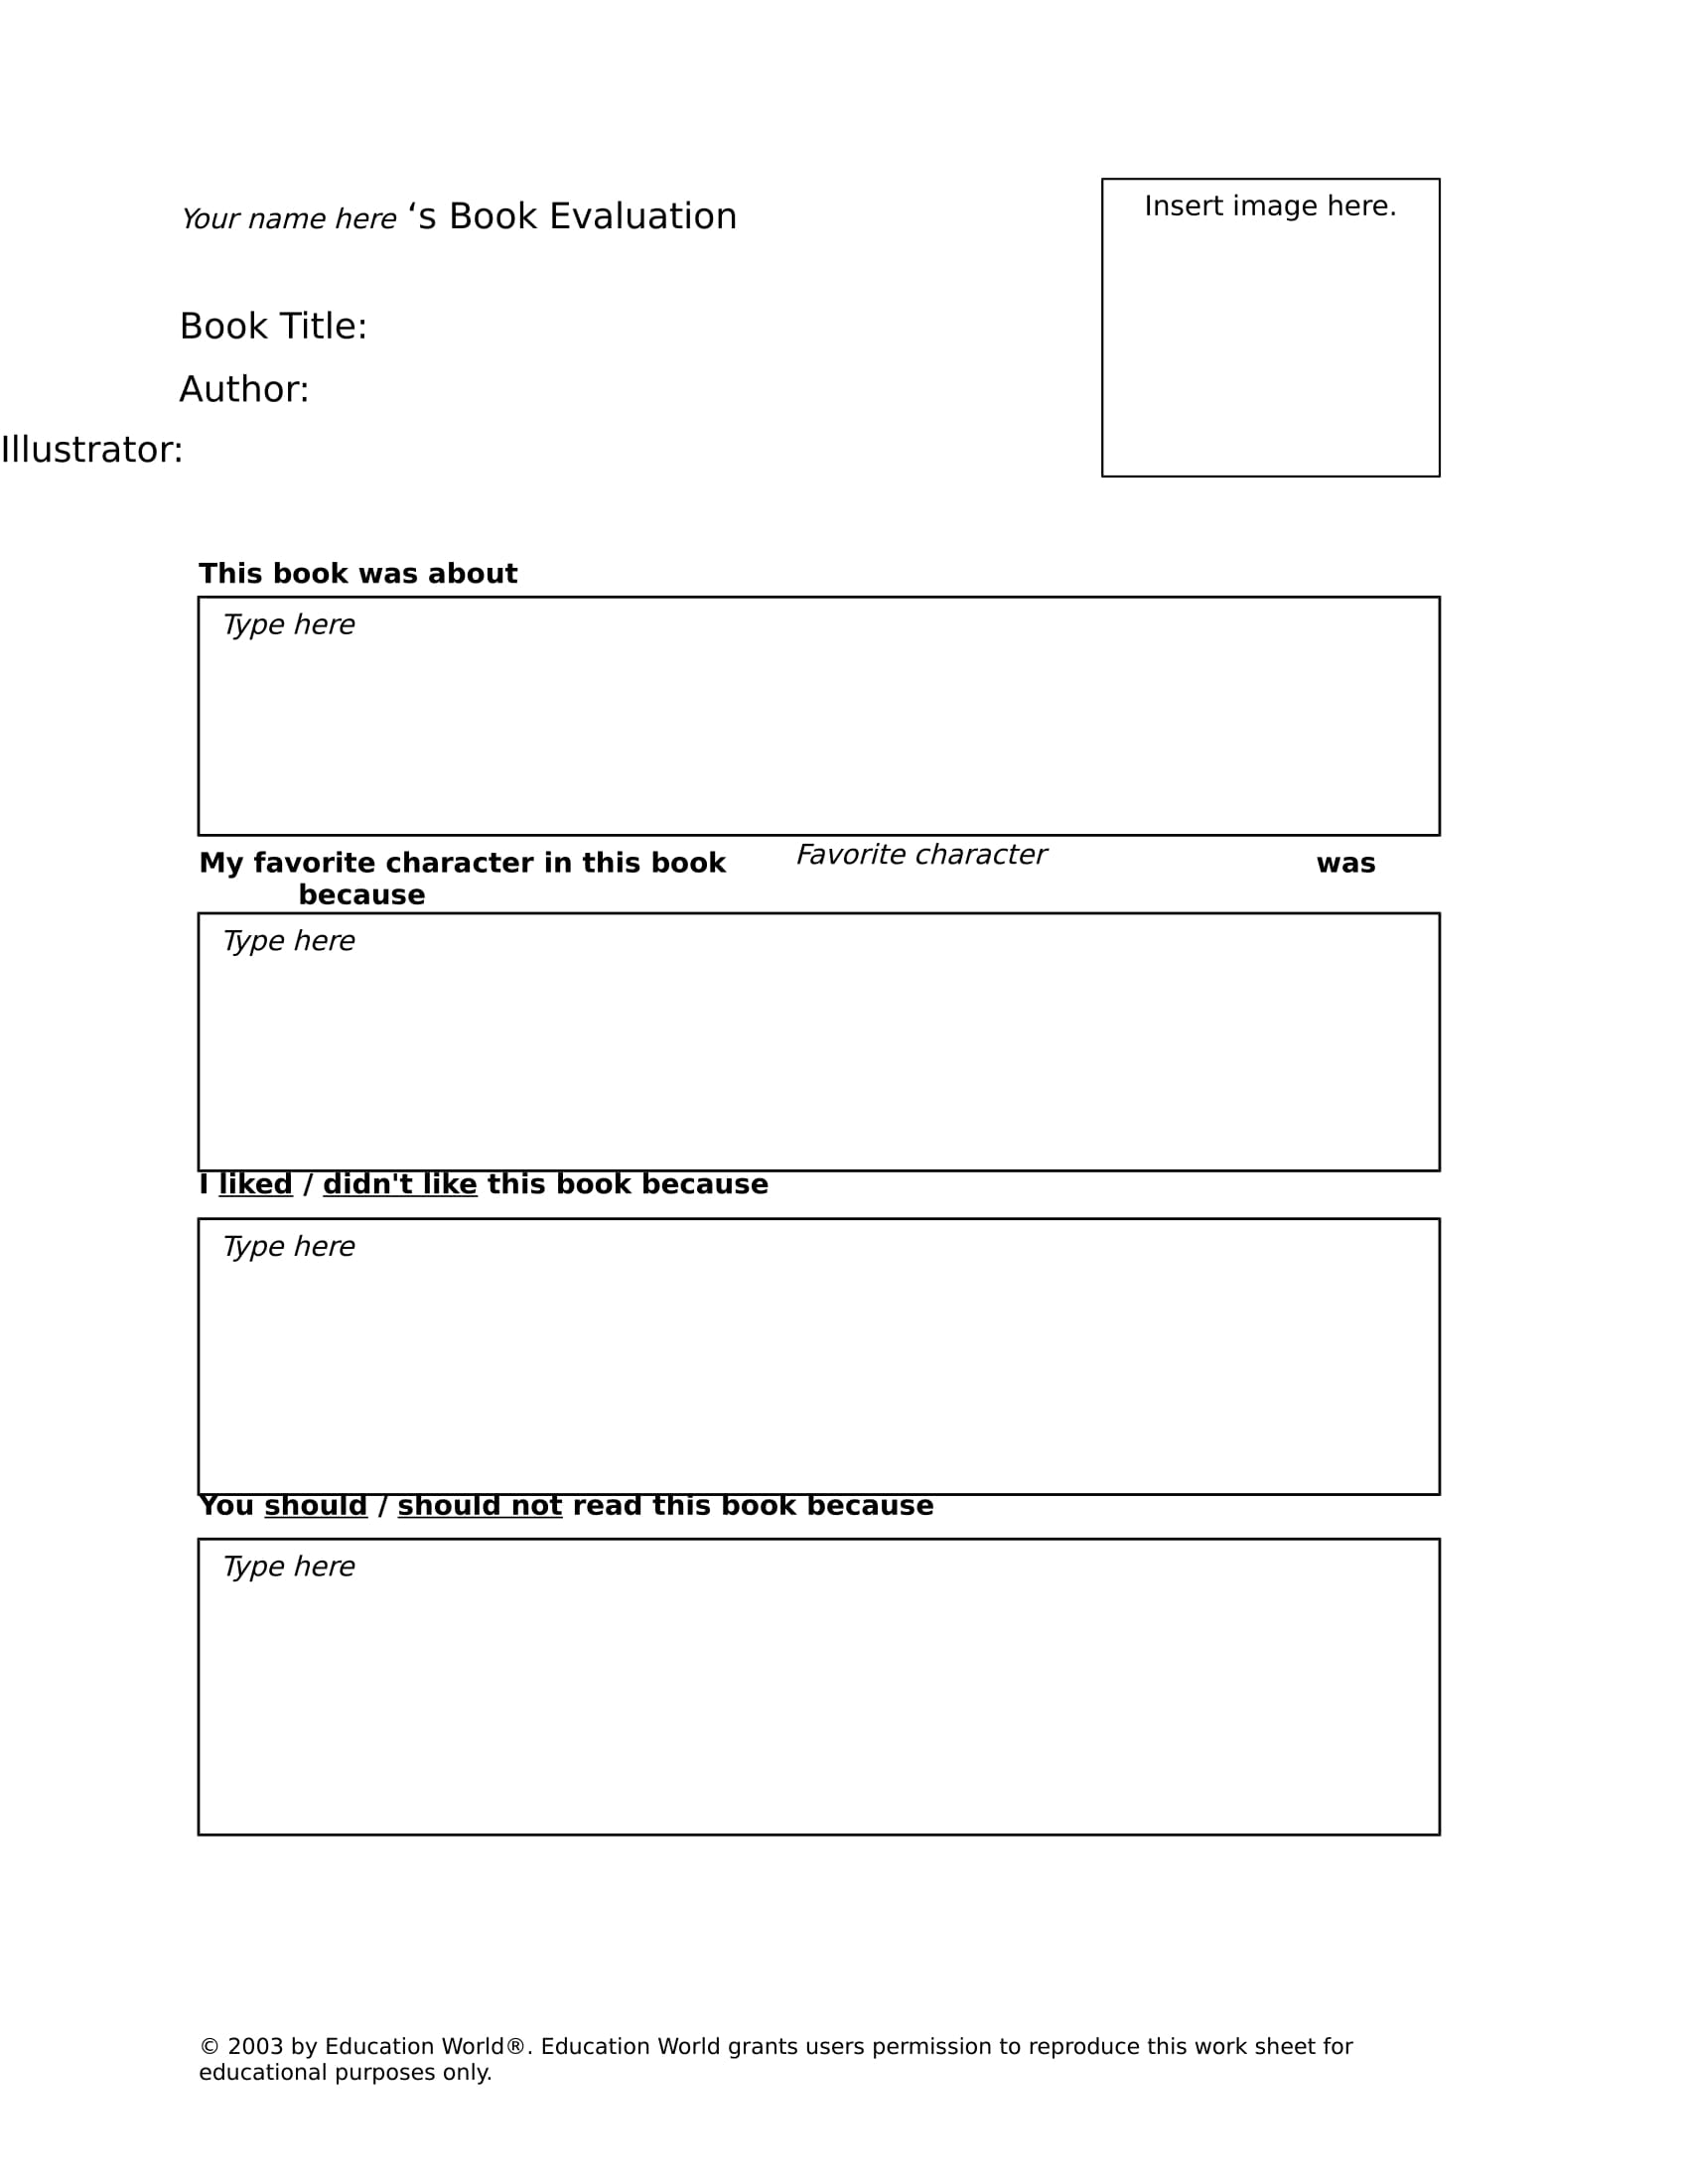 personal book evaluation form 1